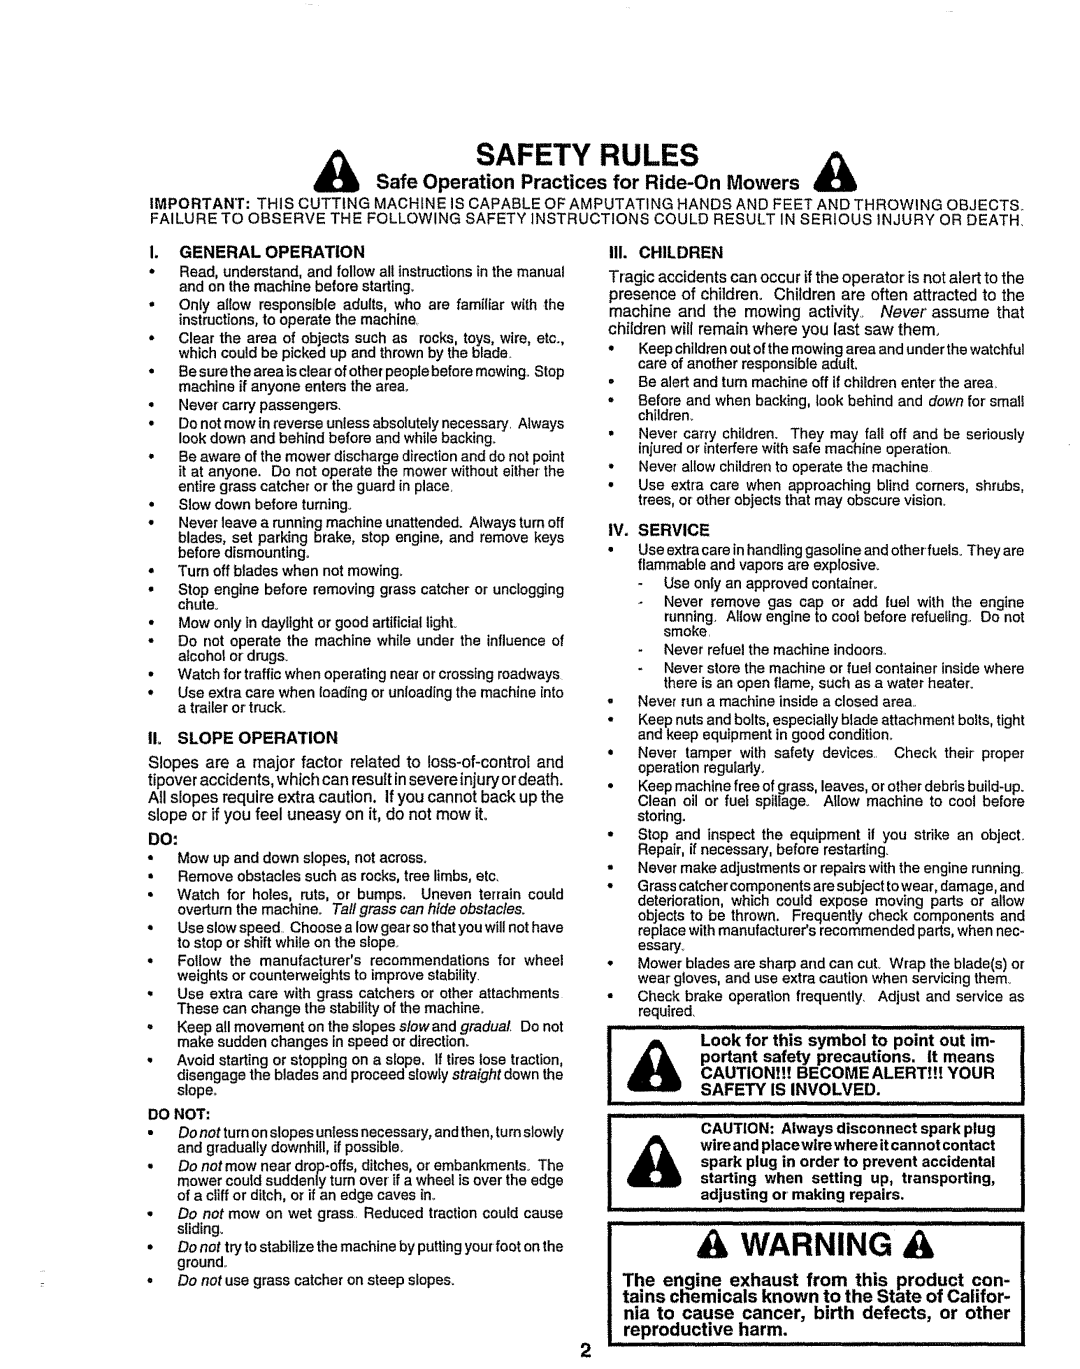 Sears 917.258473 Safety Rulesa, Safe Operation Practices for Ride-OnMowers, lU. CHILDREN, I1o SLOPE OPERATION, The engine 